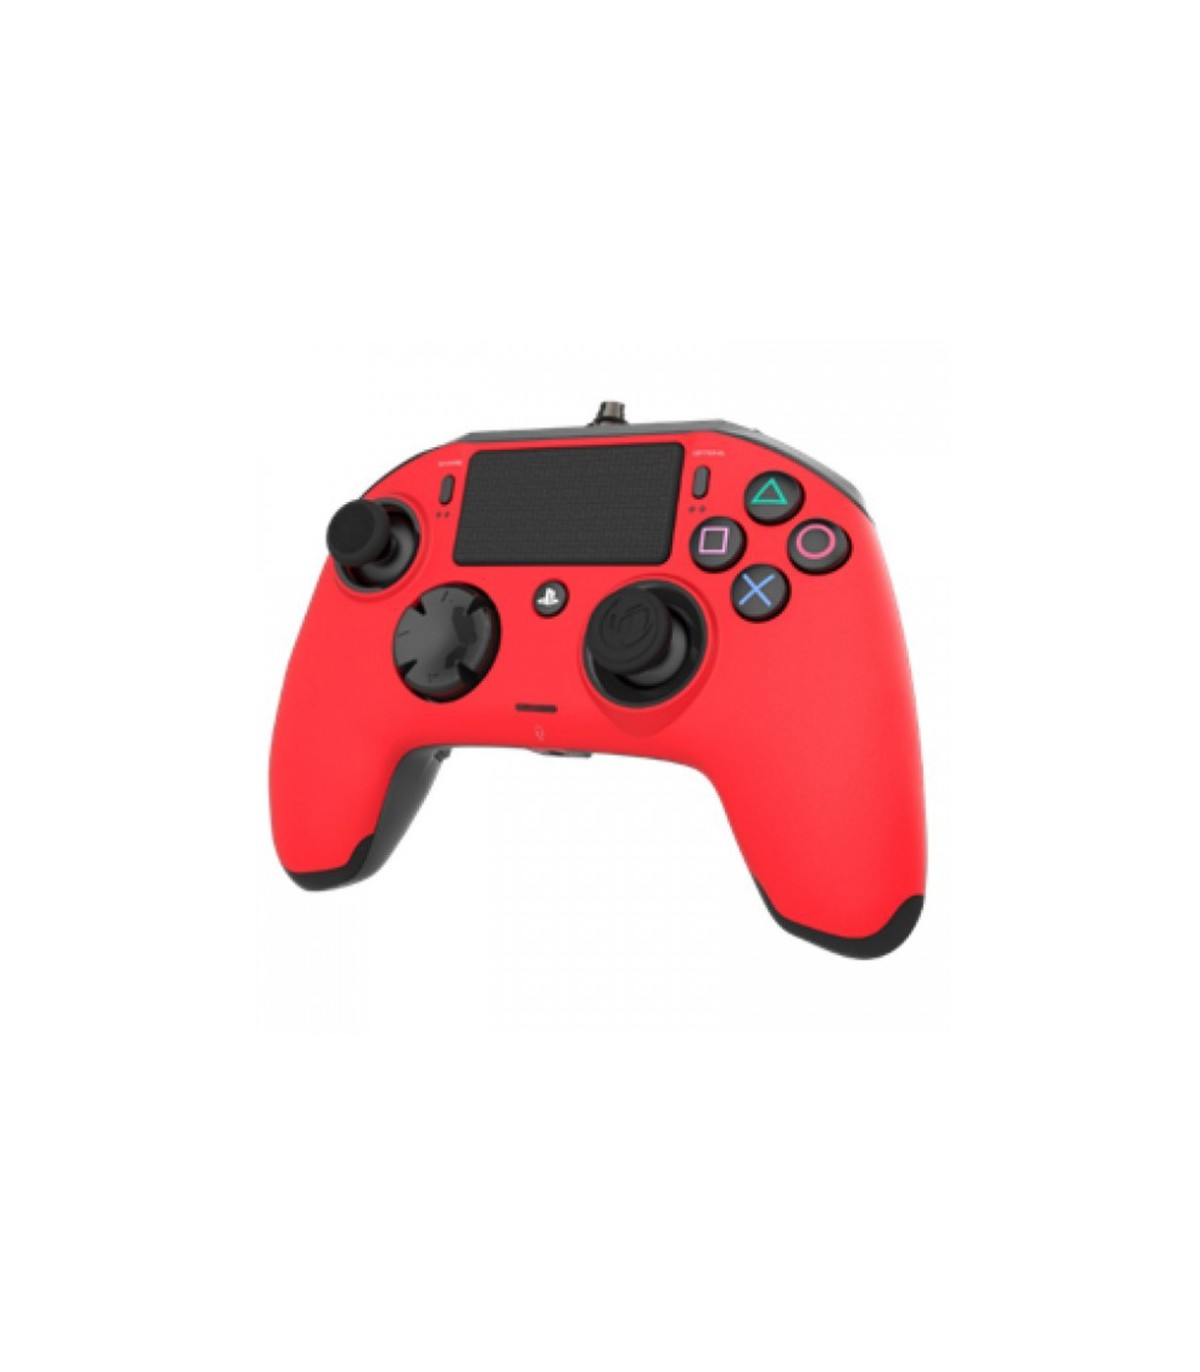  PS4 Revolution Pro Controller red